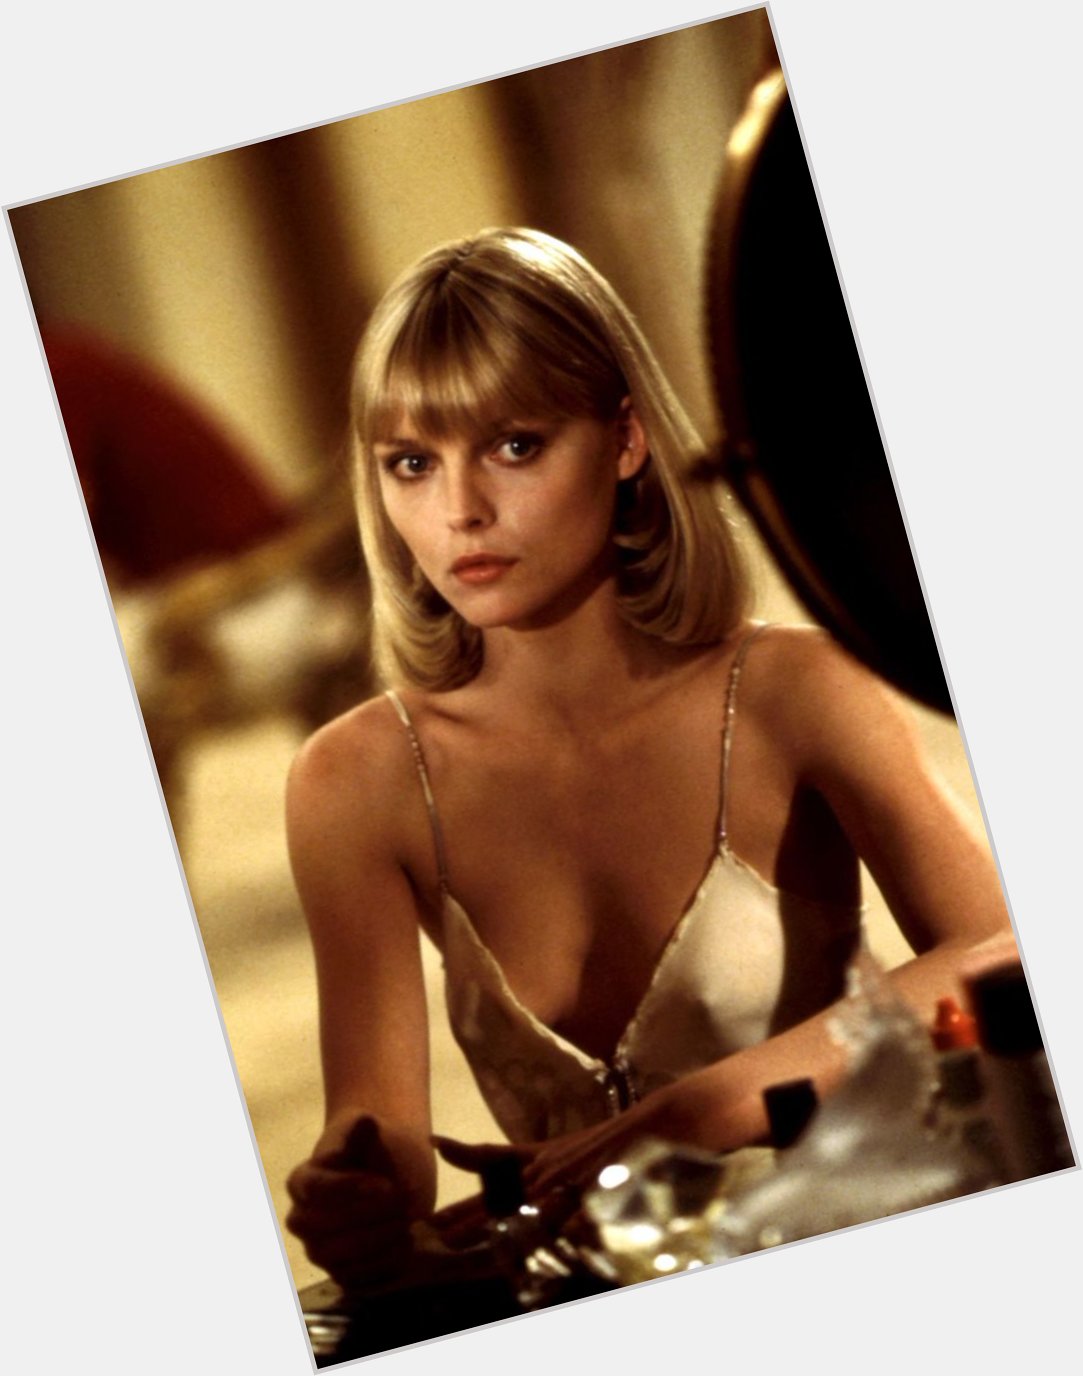 Happy birthday to the great Michelle Pfeiffer!  